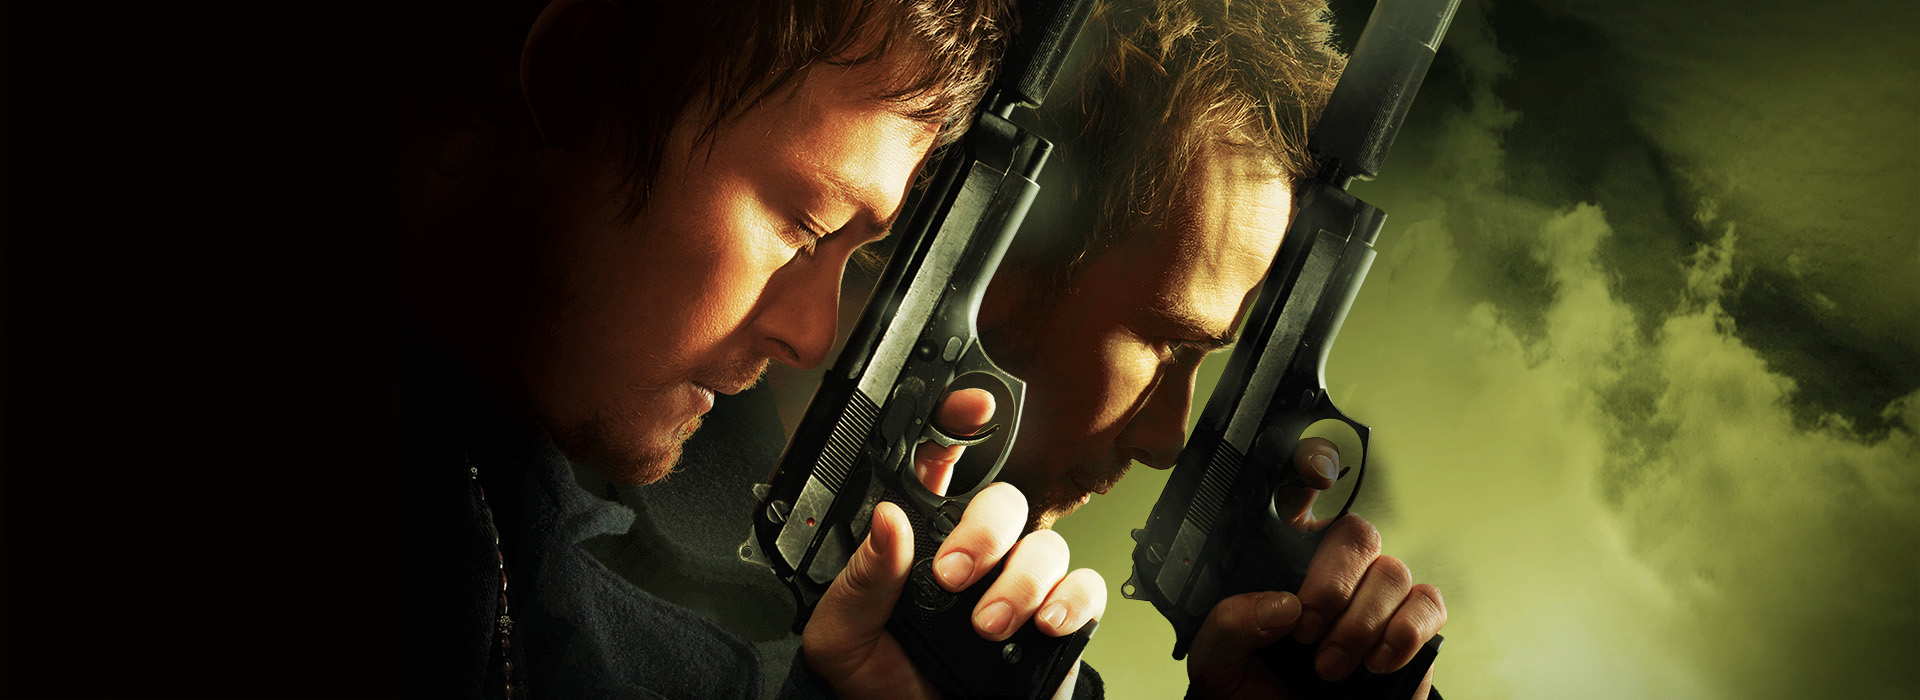 Movie poster Boondock Saints II, The: All Saints Day (HD)